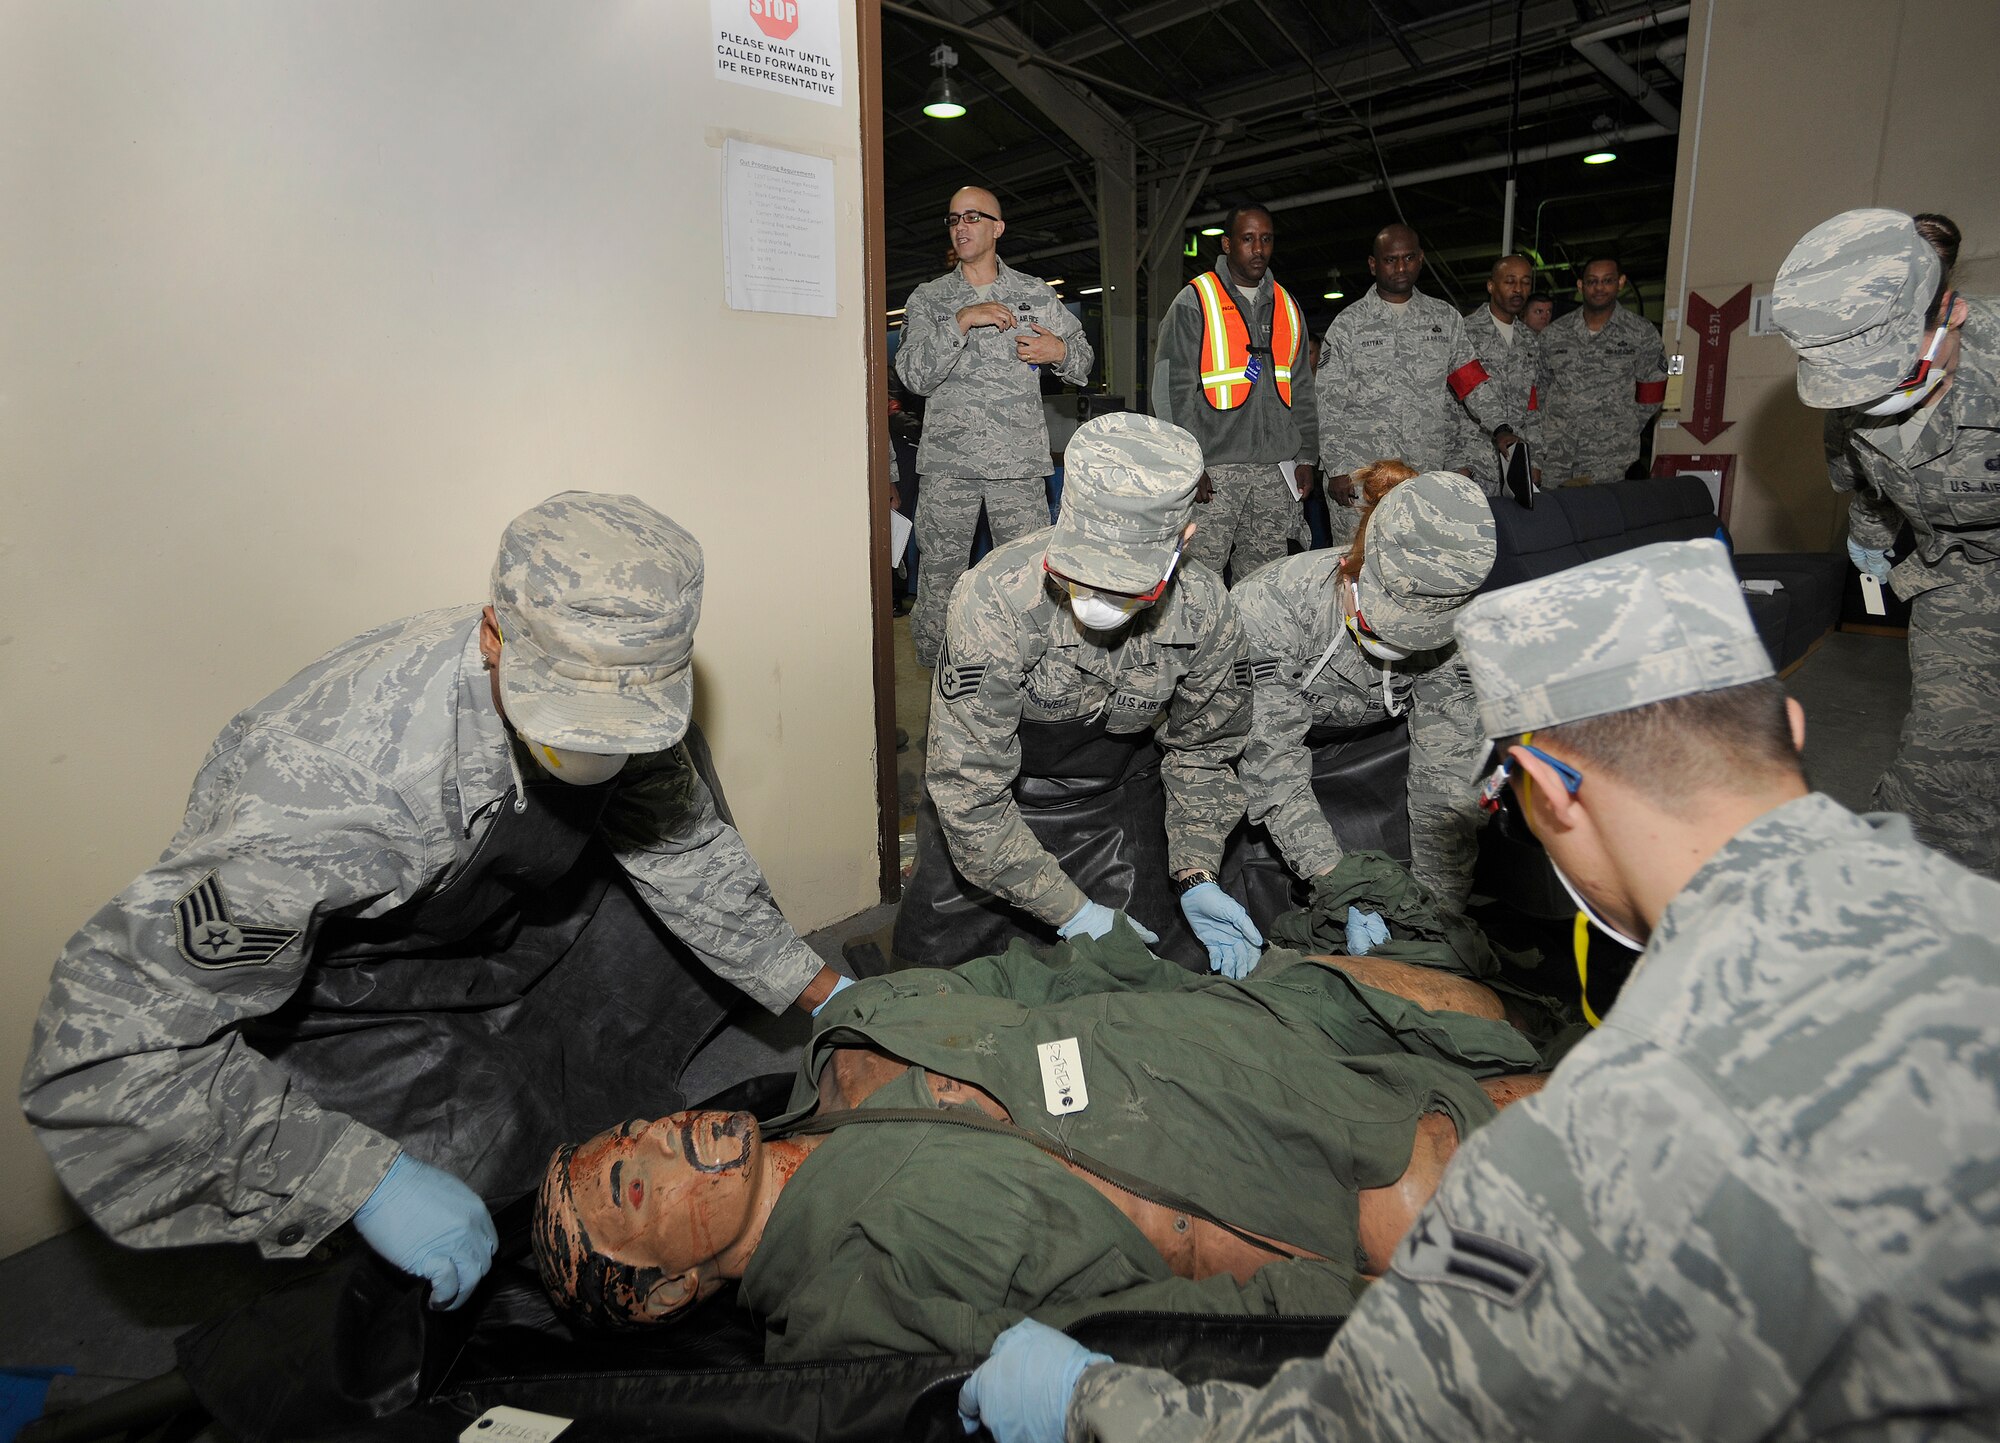 Members of the search and recovery team at Kunsan Air Base, Republic of Korea, attend to a dummy victim during a simulated explosion exercise on April 16, 2012. The team was evaluated by both 8th Fighter Wing exercise evaluation and Pacific Air Forces Inspector General team members as part of an ongoing inspection of the Wolf Pack. (U.S. Air Force photo/Staff Sgt. Rasheen Douglas)